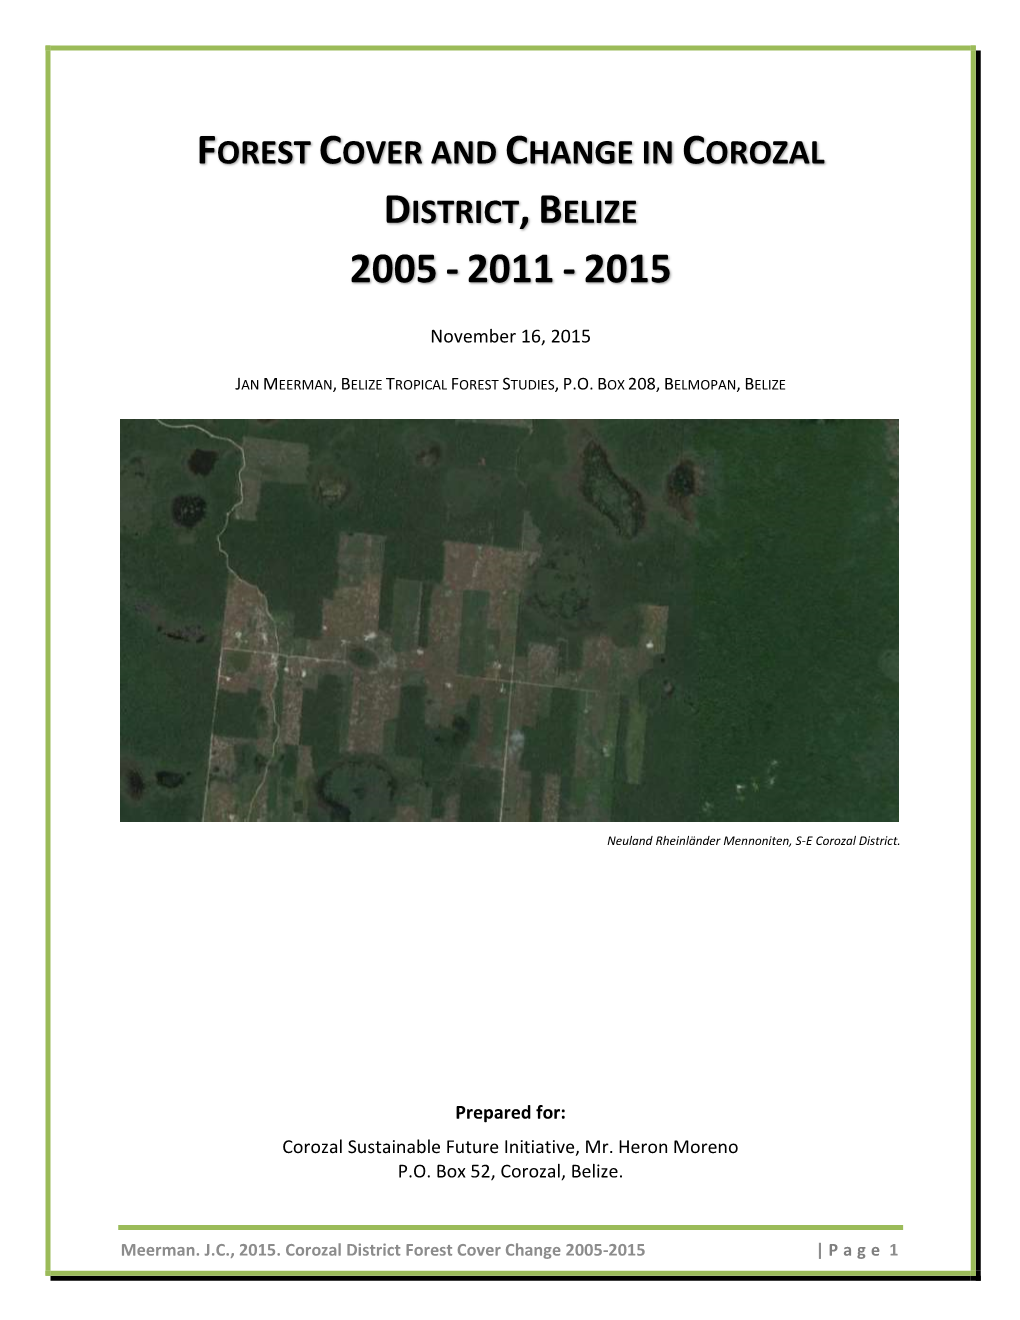 Forest Cover and Change in Corozal District, Belize 2005 - 2011 - 2015